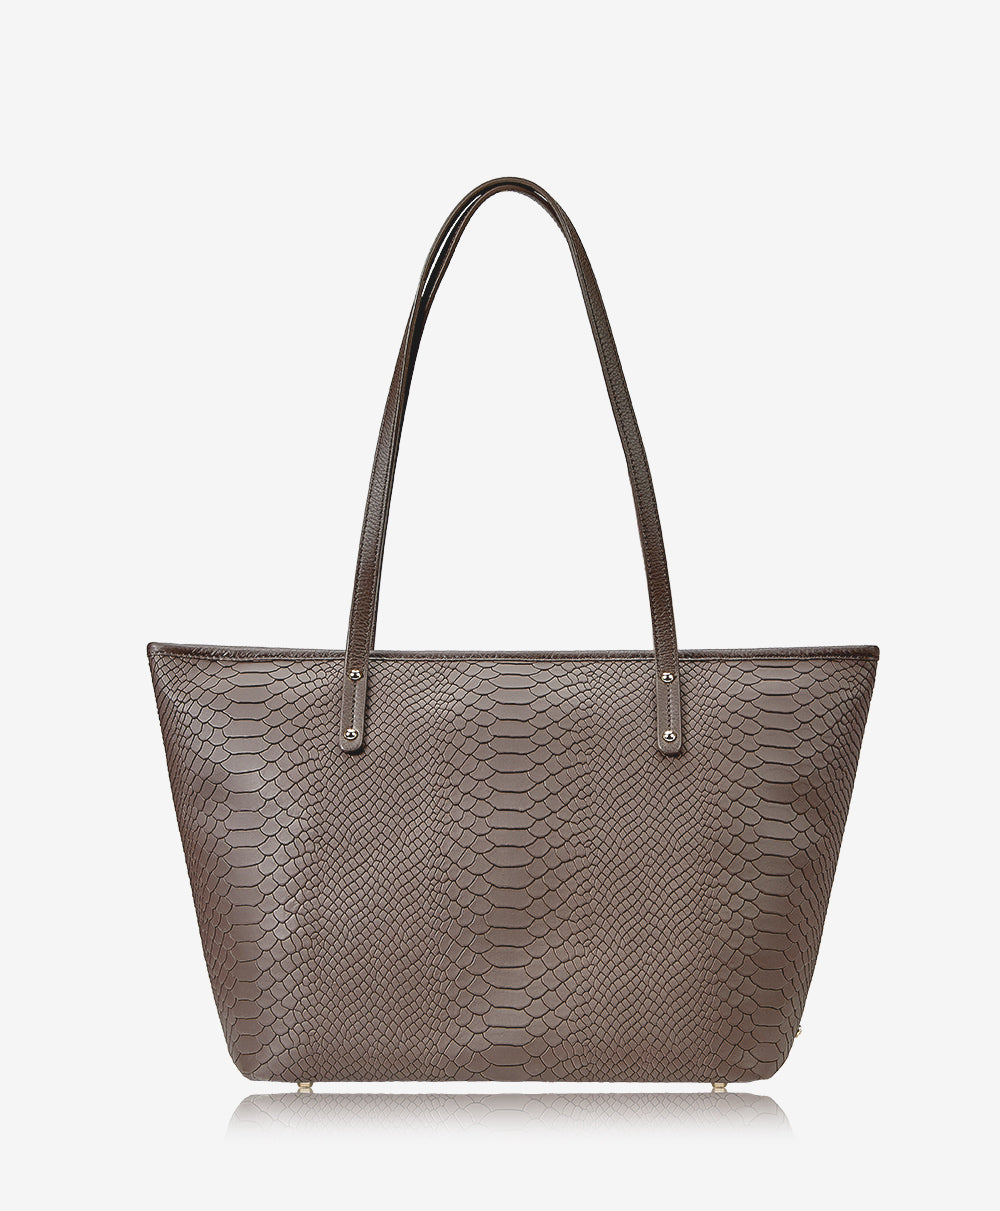 GiGi New York Zip Taylor Tote Taupe Embossed Python Leather